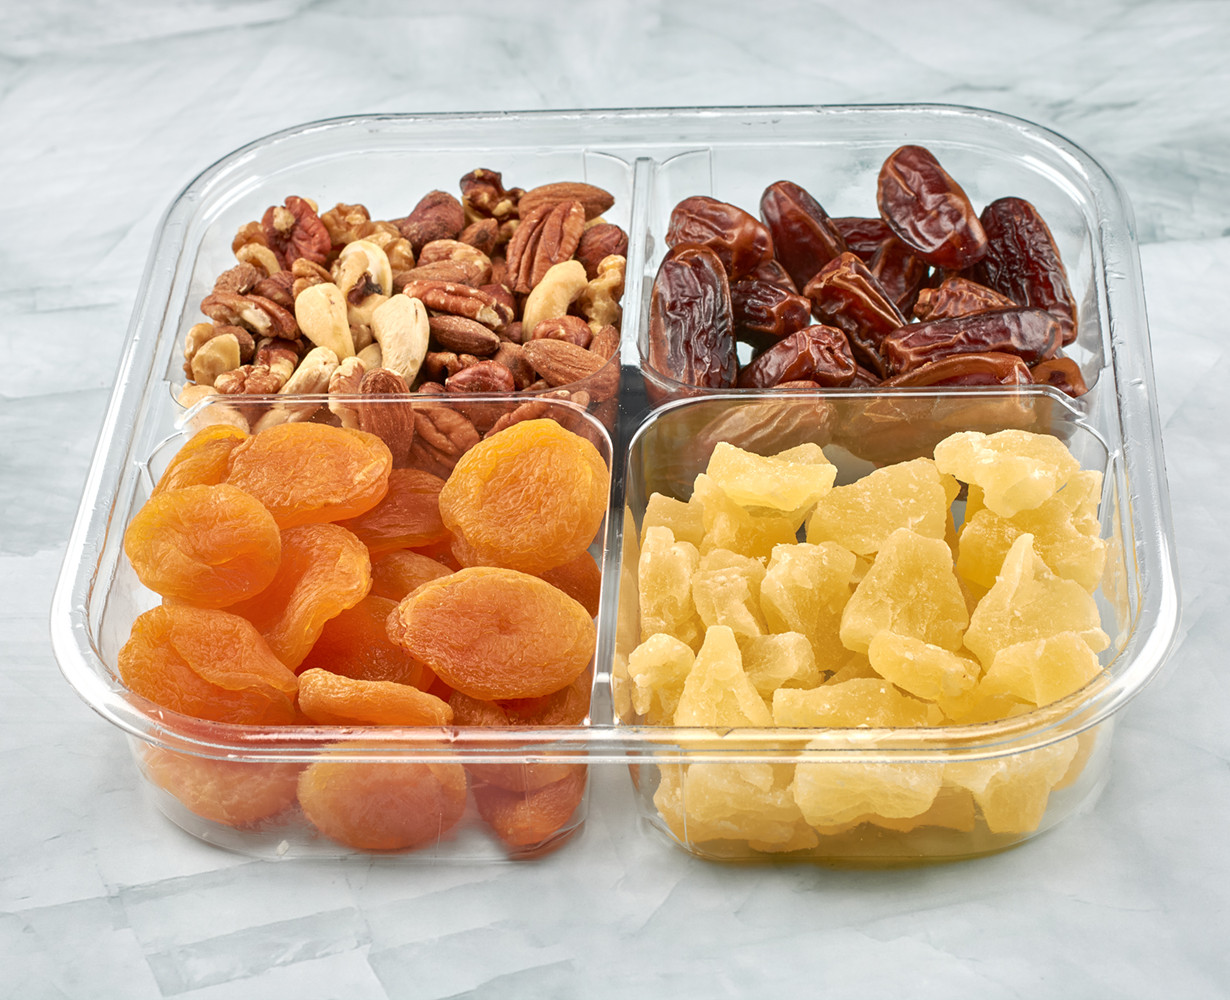 Dried Fruits and Nuts Tray verion 1